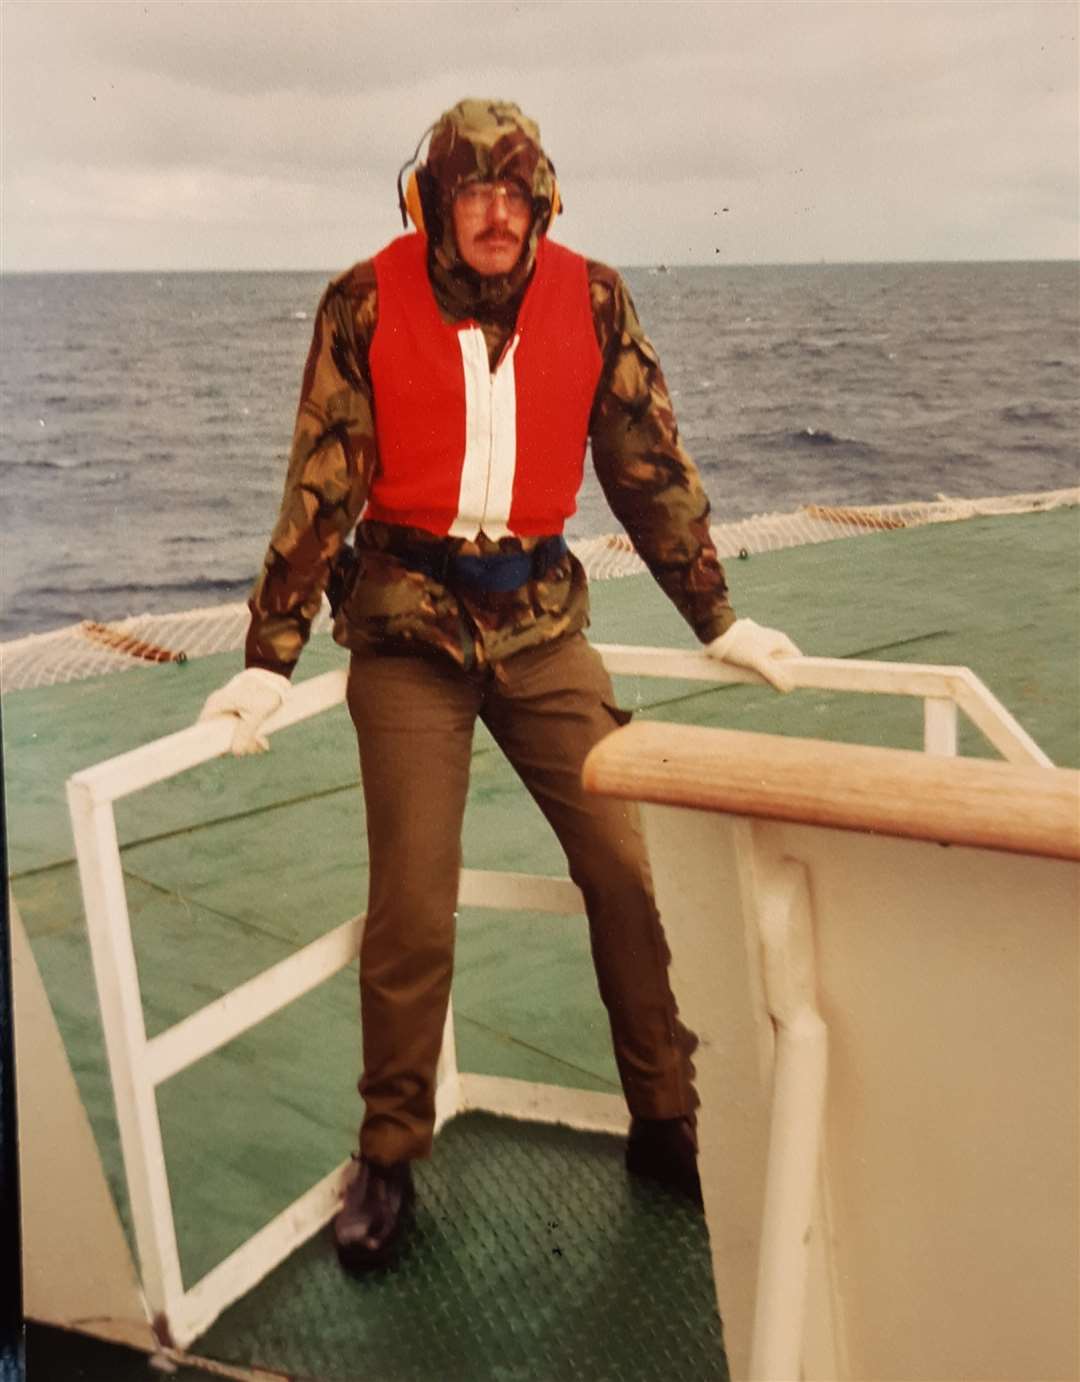 Brian Short at sea during the conflict, 1982. From his book The Band That Went to War